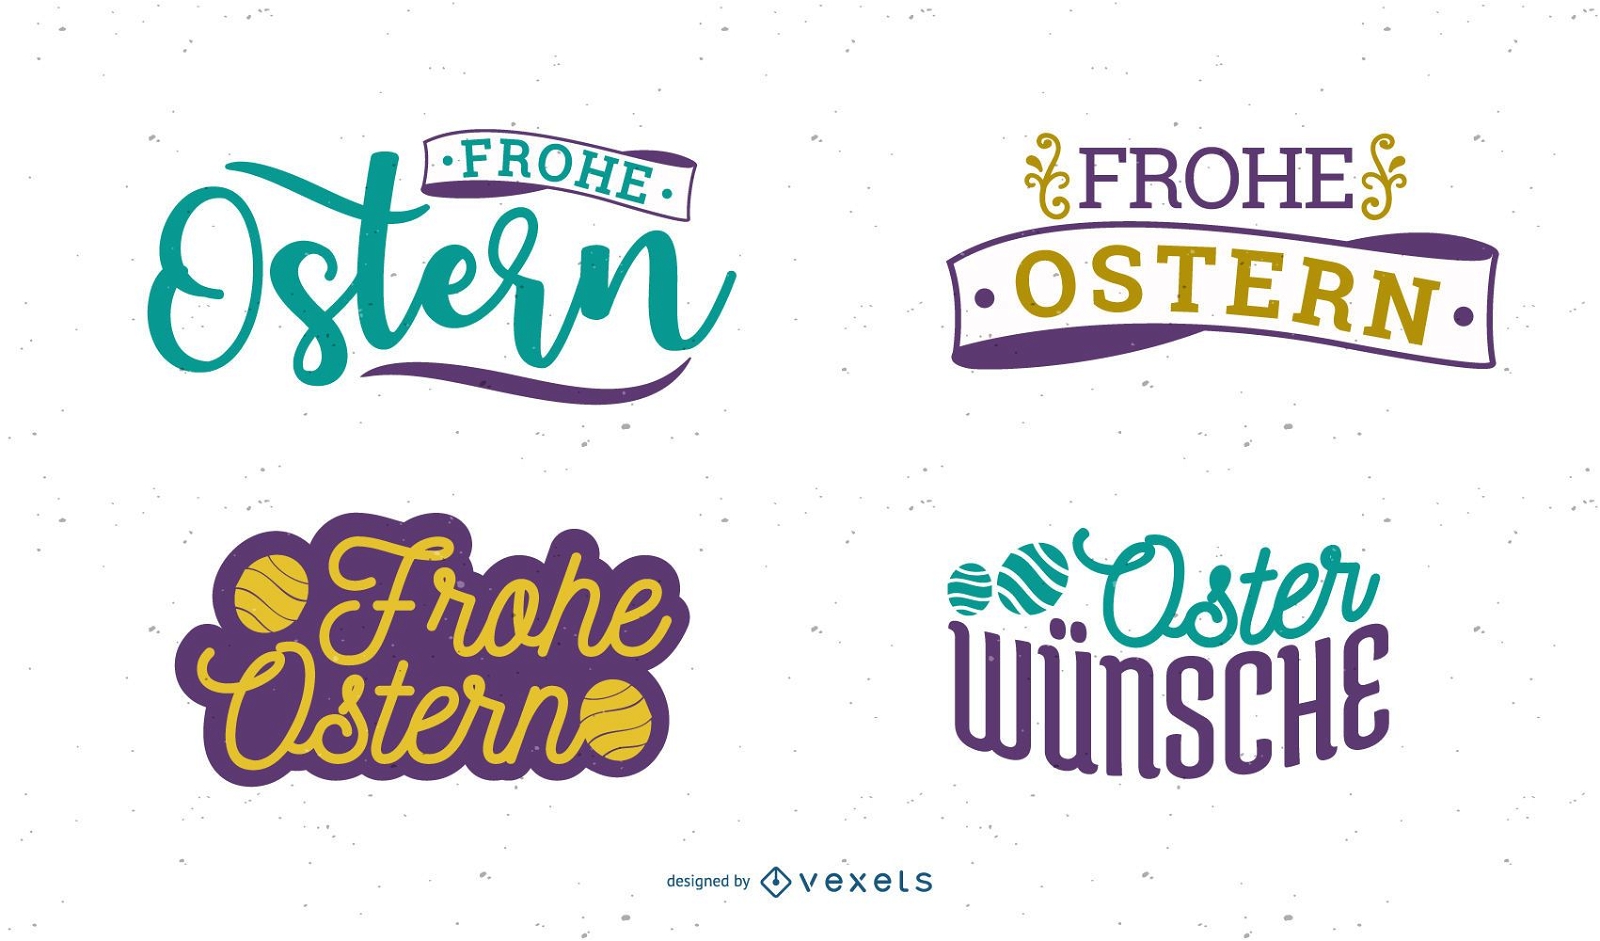 Frohe Ostern Easter Greeting Design